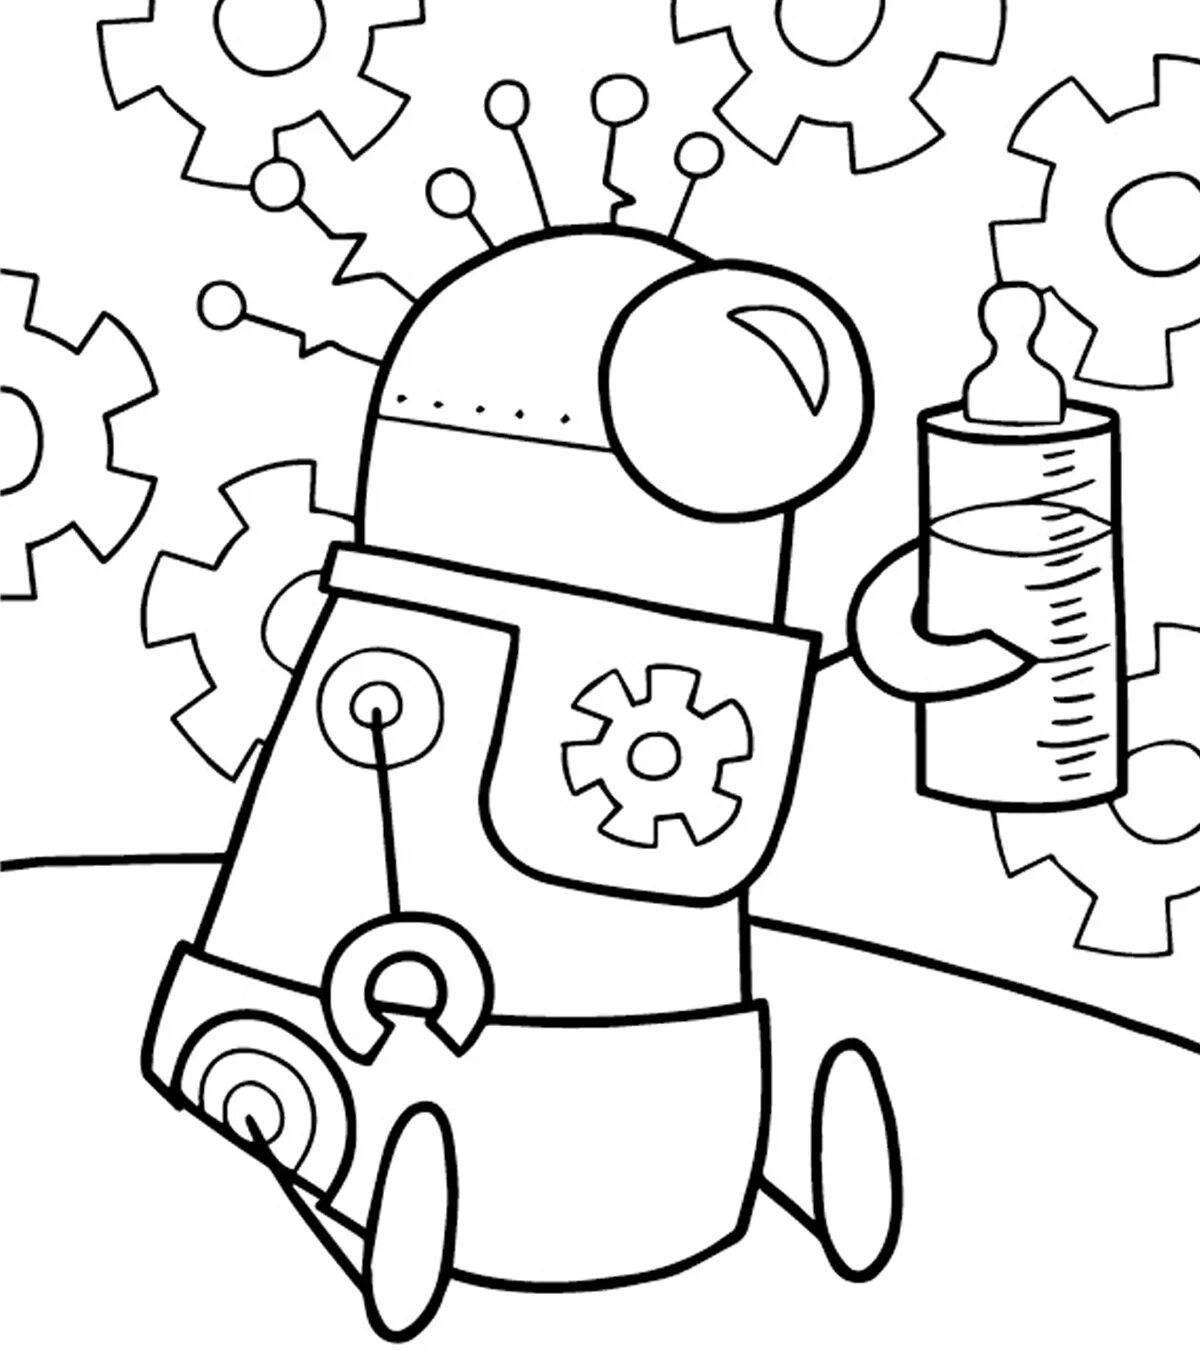 Cute robot coloring book for 5 year olds